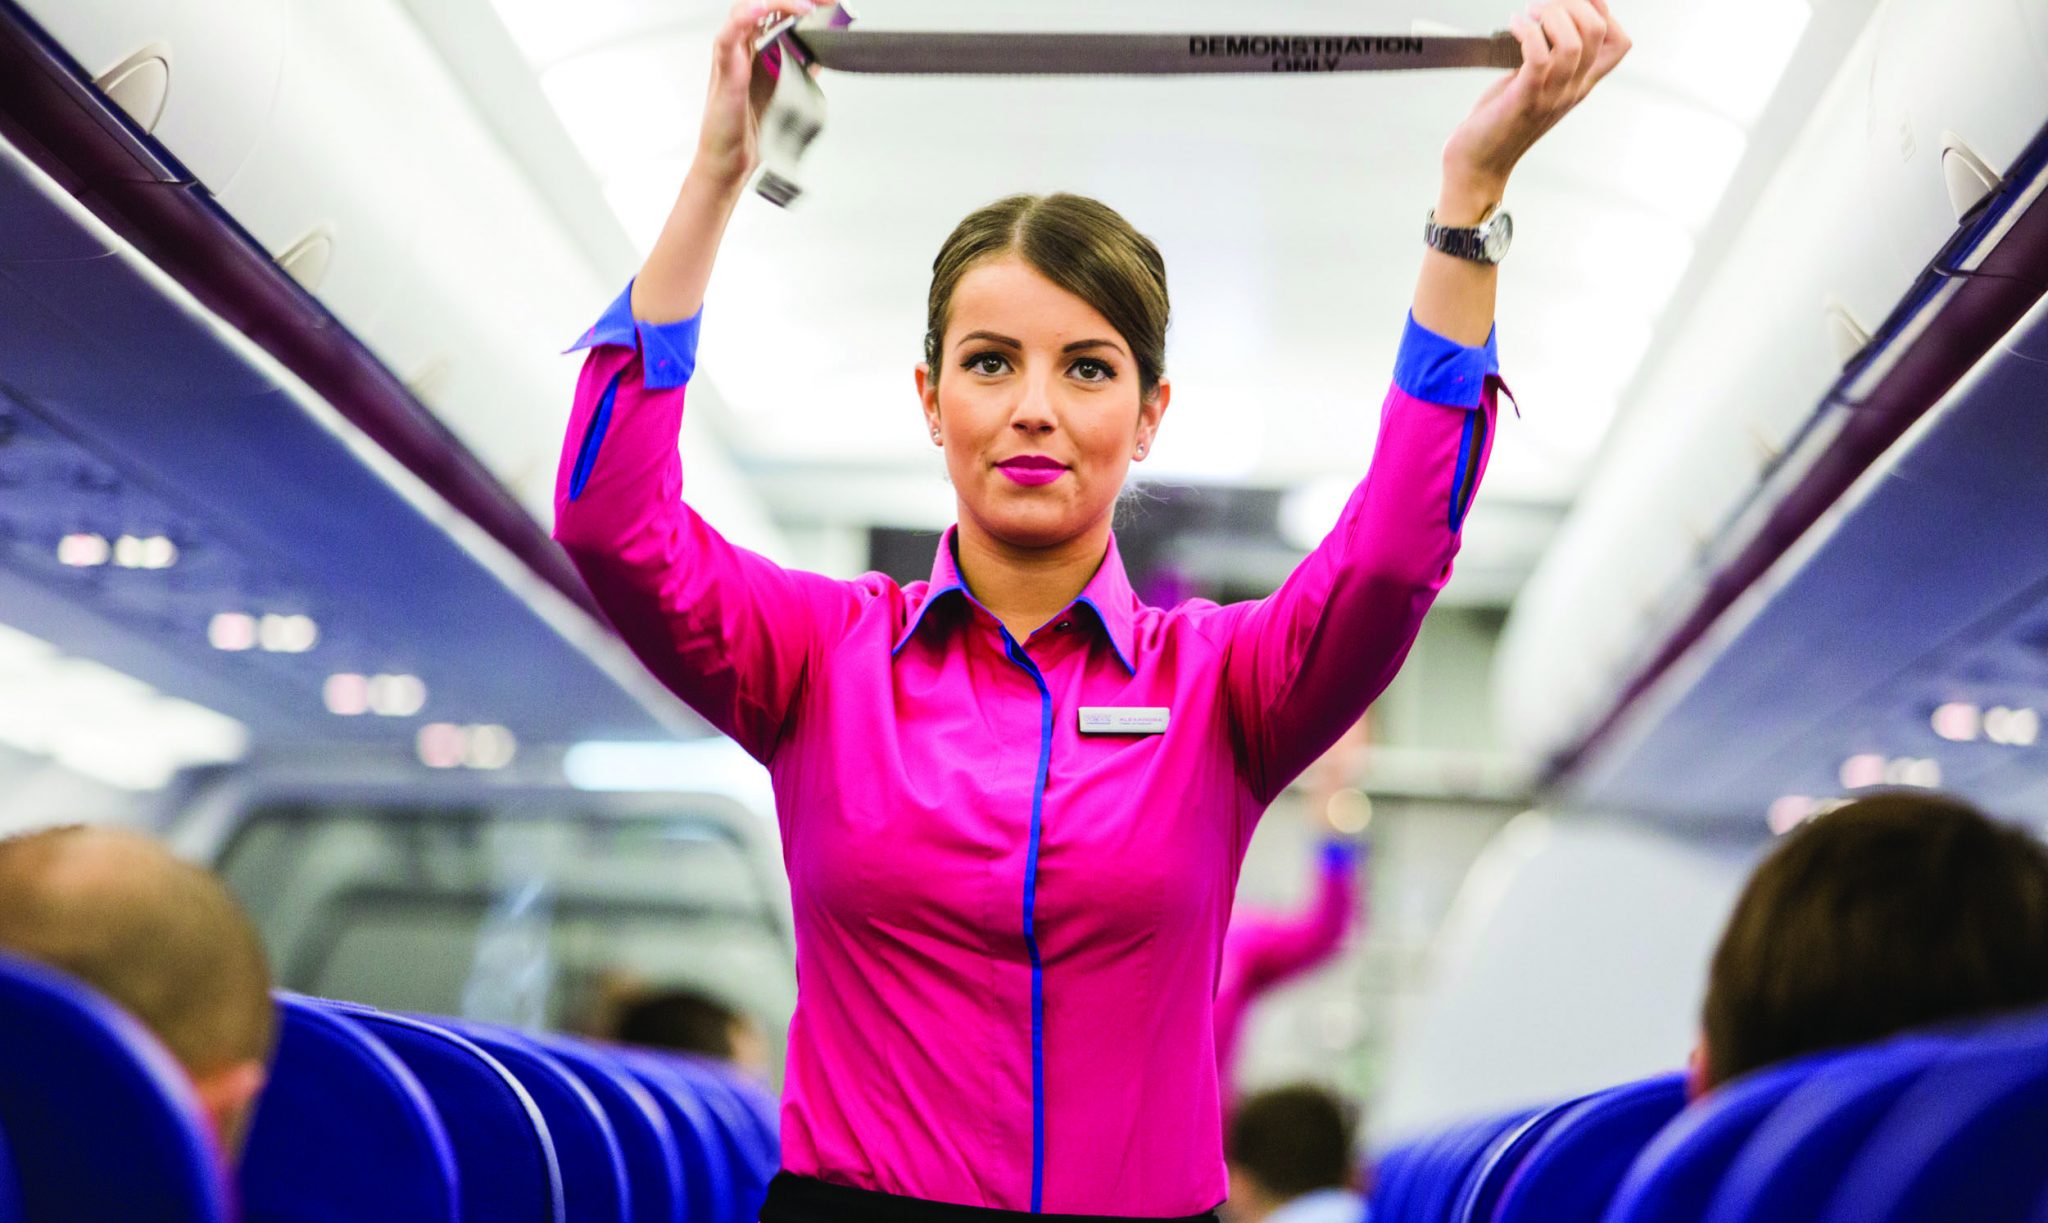 Can't read or write smell practice Hungary's Wizz Air Is About to Hire Up To 1,300 Cabin Crew Throughout  Europe - Here Are the Details